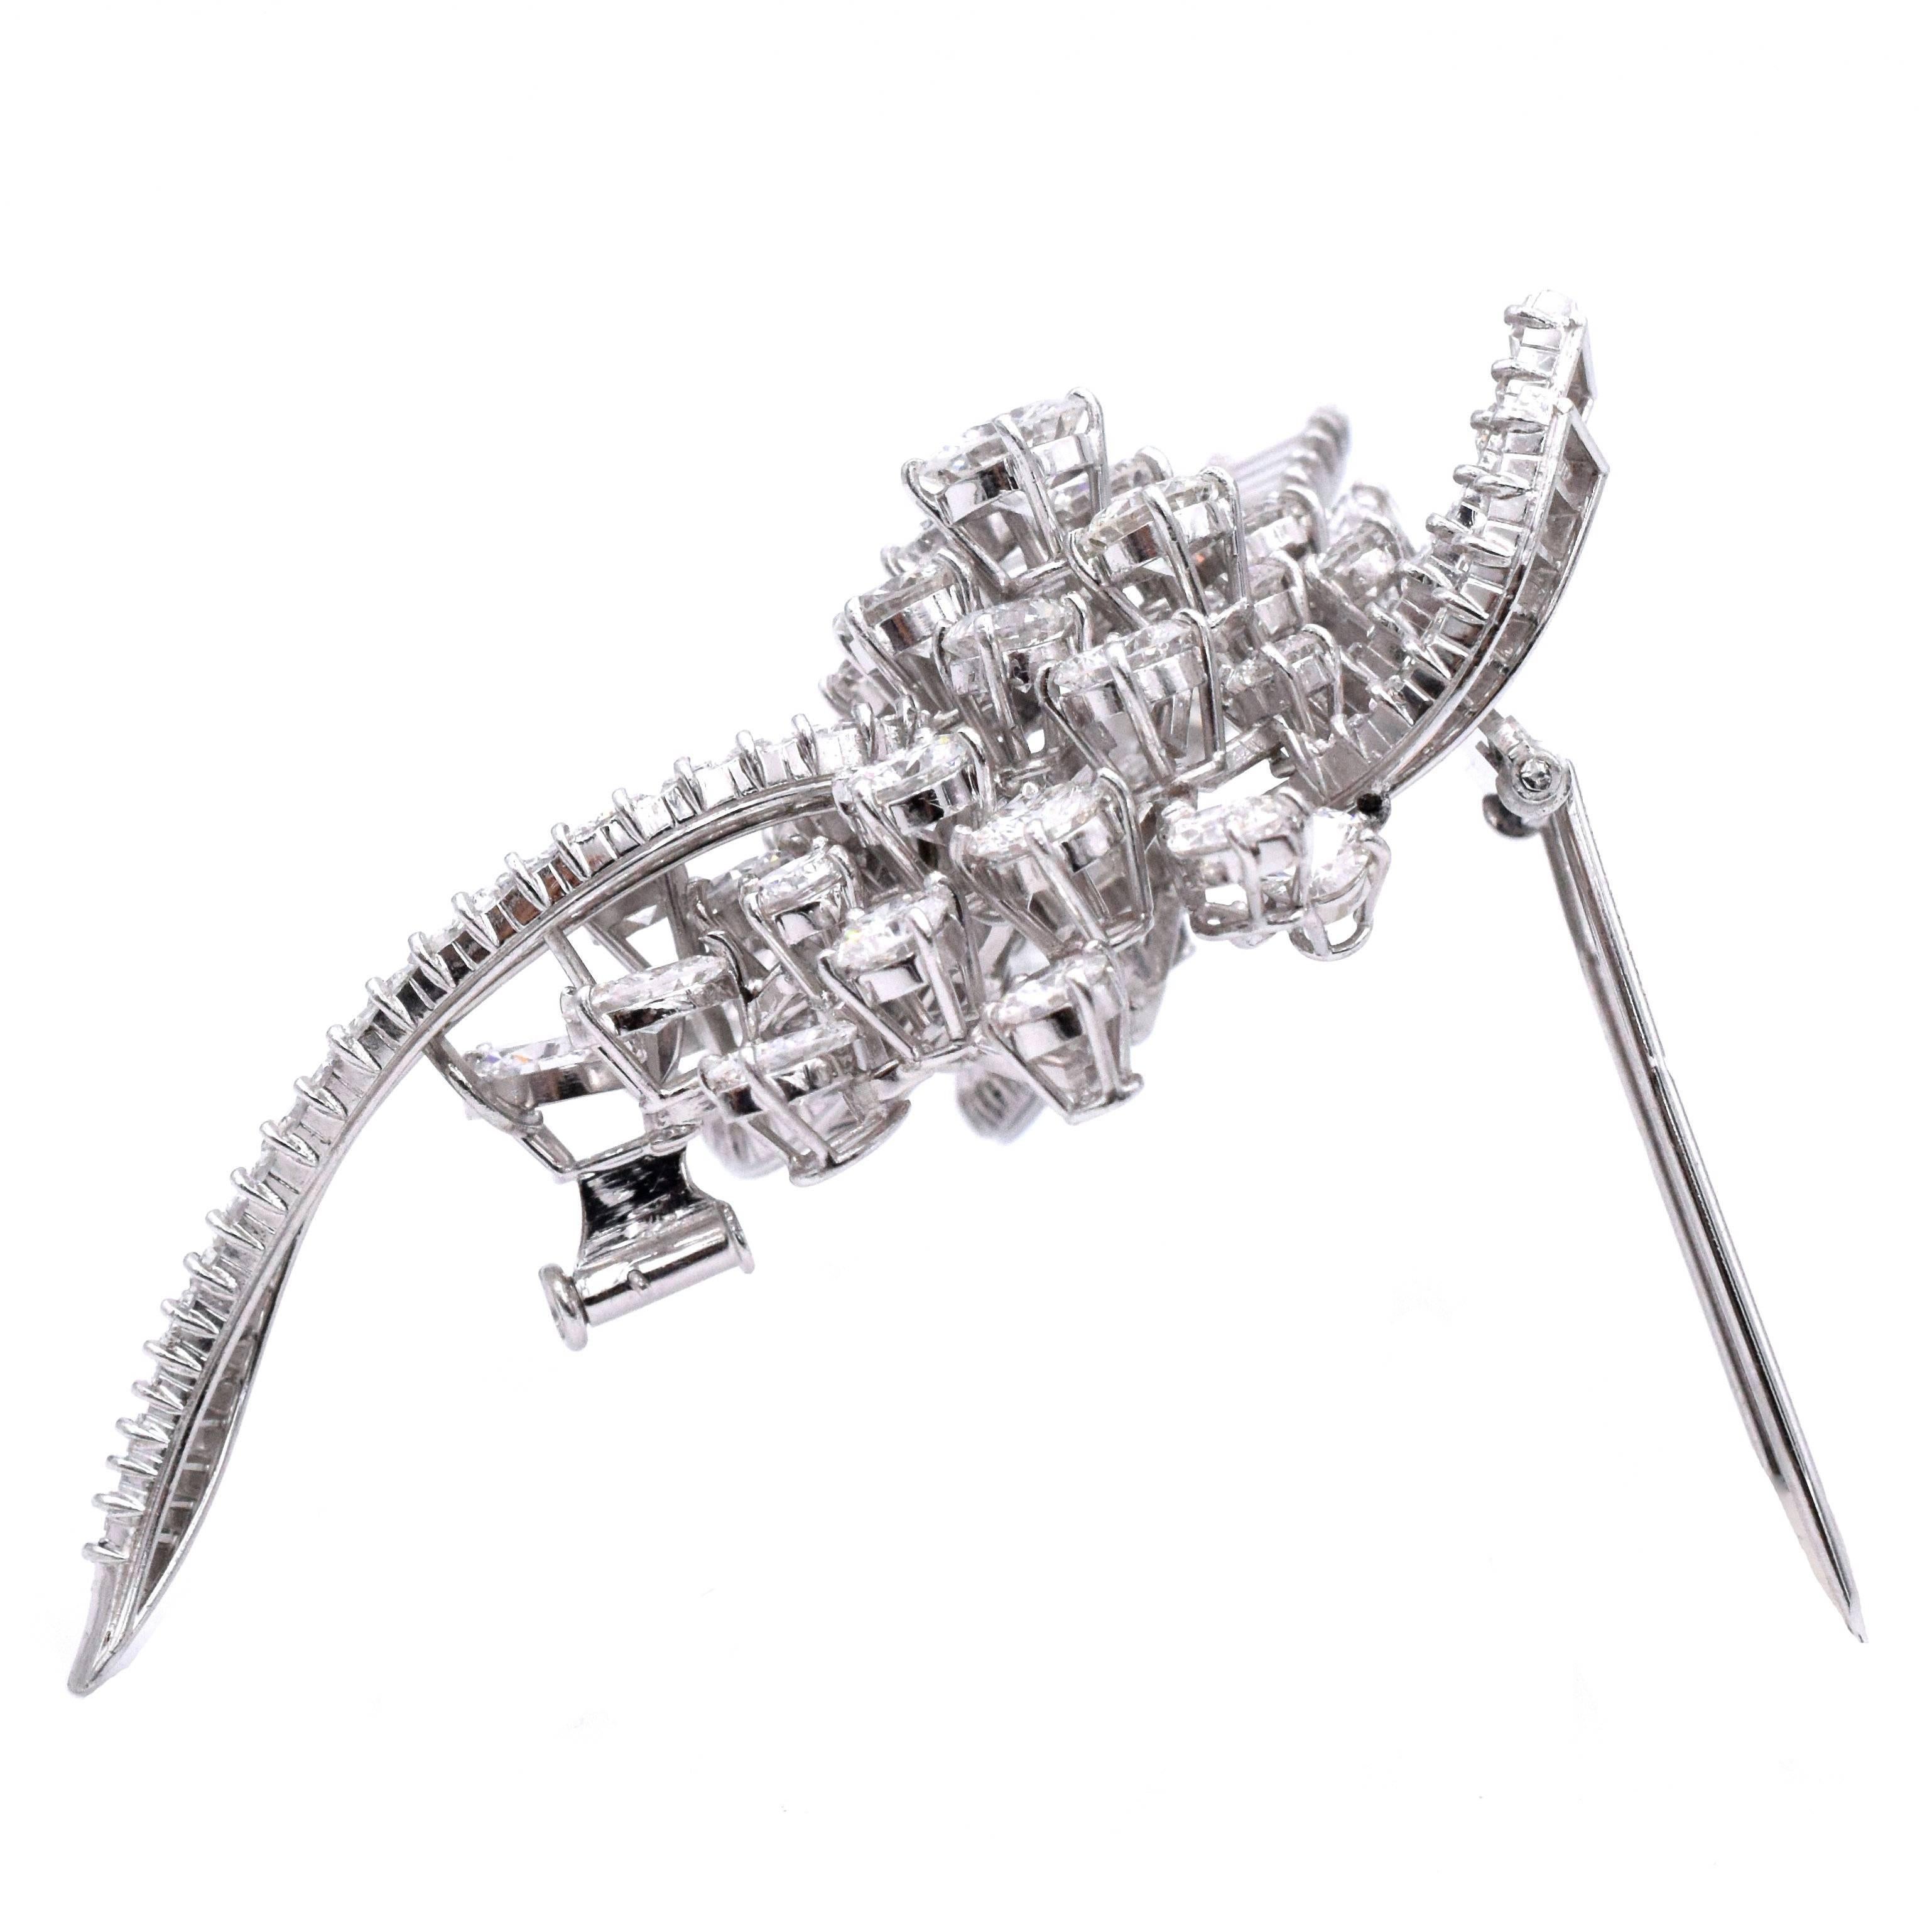 Timeless & Elegant Brooch.  French
The stylized bow centering one round diamond approximately .90 ct., within a cluster of 28 round diamonds approximately 10.00 cts., tipped by 7 marquise-shaped diamonds approximately 2.00 cts., within ribbons of 90